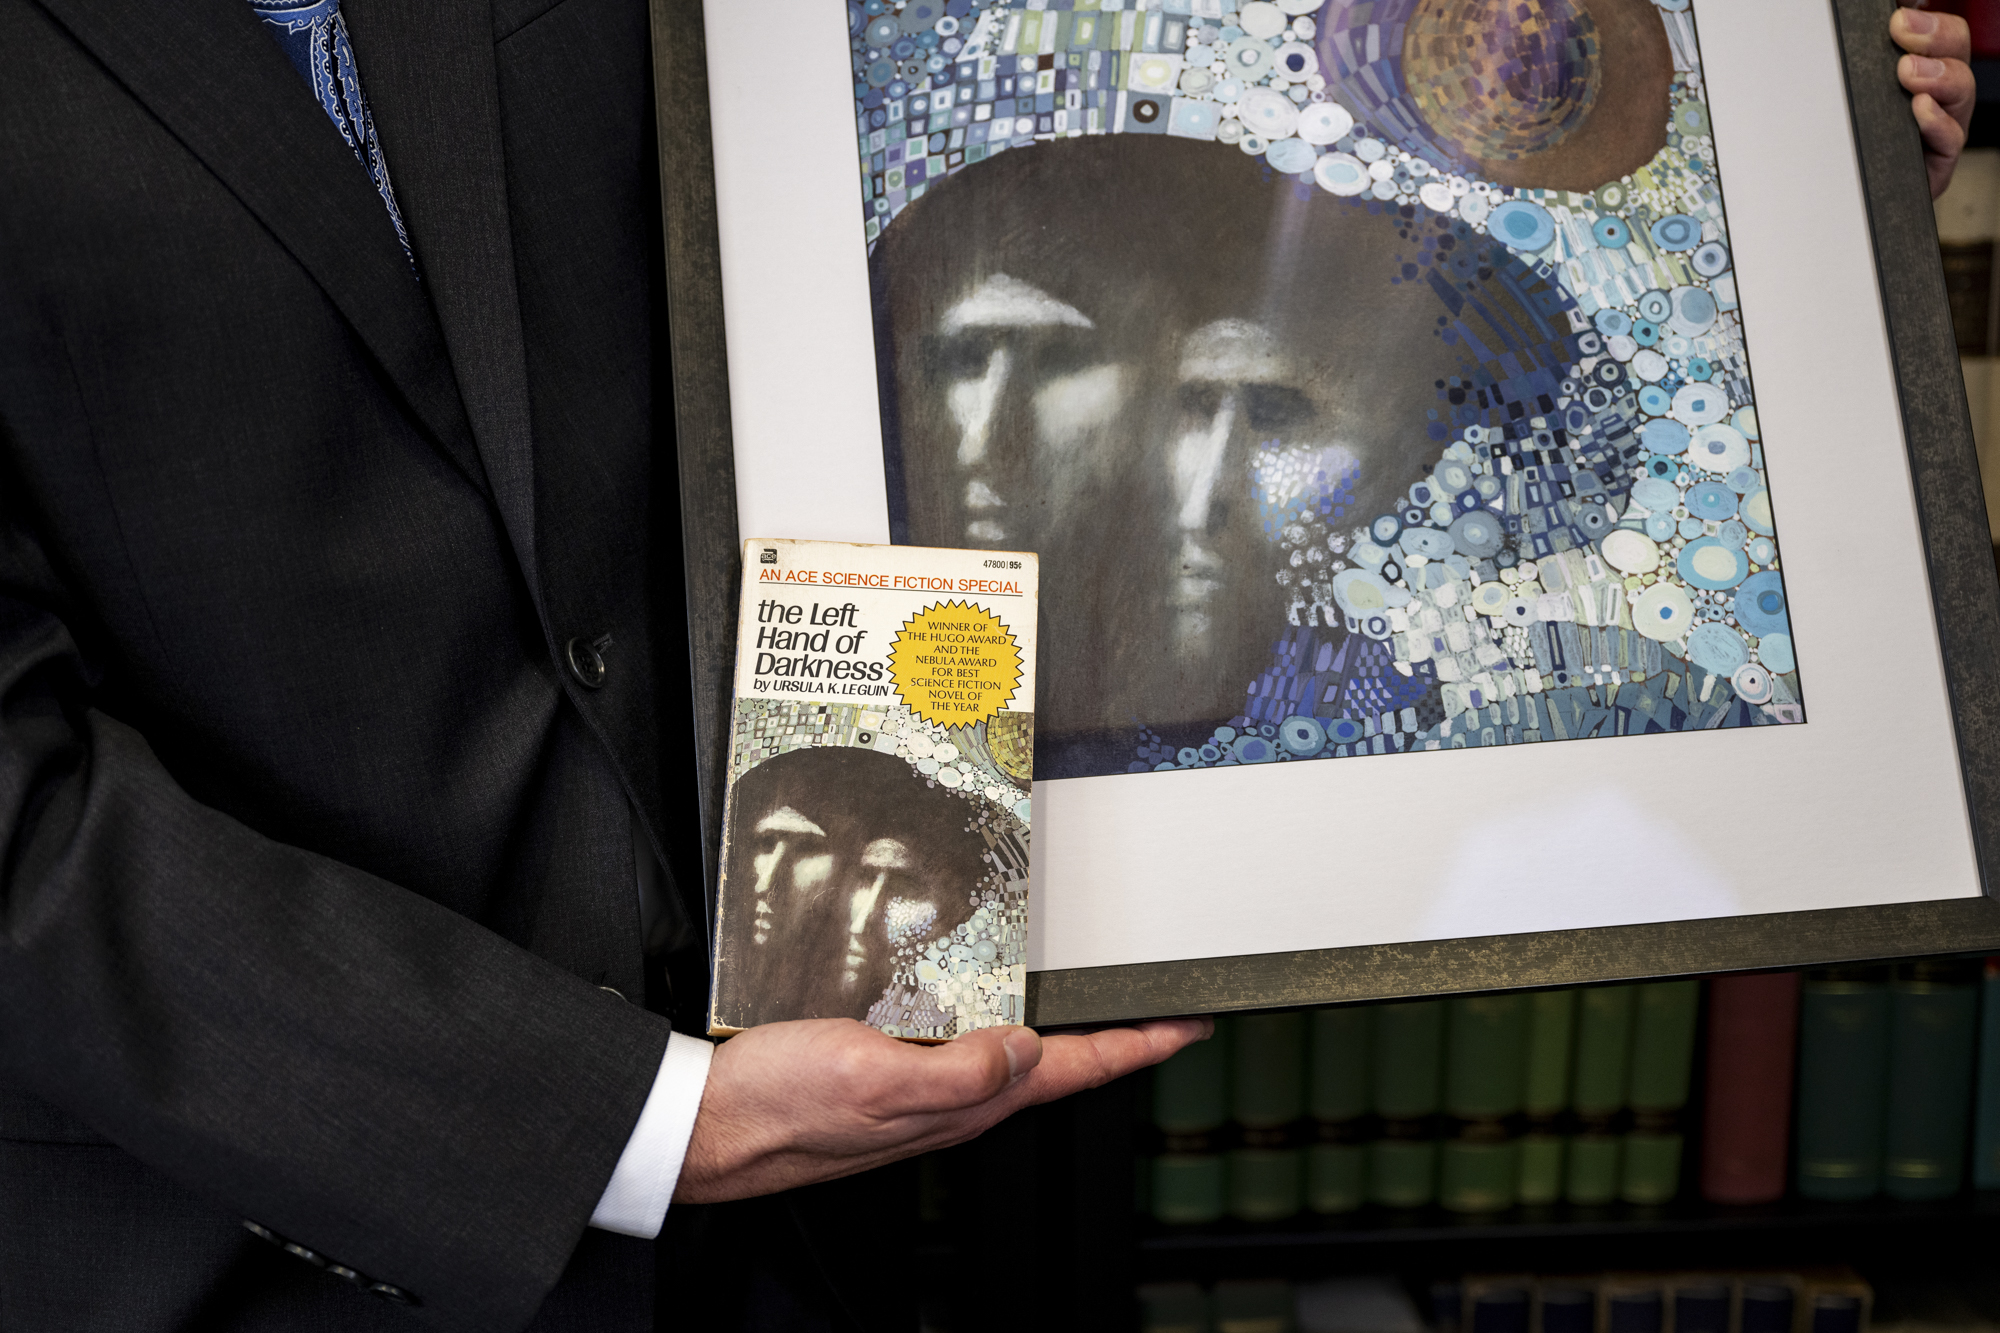 Hand holds a paperback book in front of a framed painting with the larger image of the book cover: two blurry faces against an abstract field